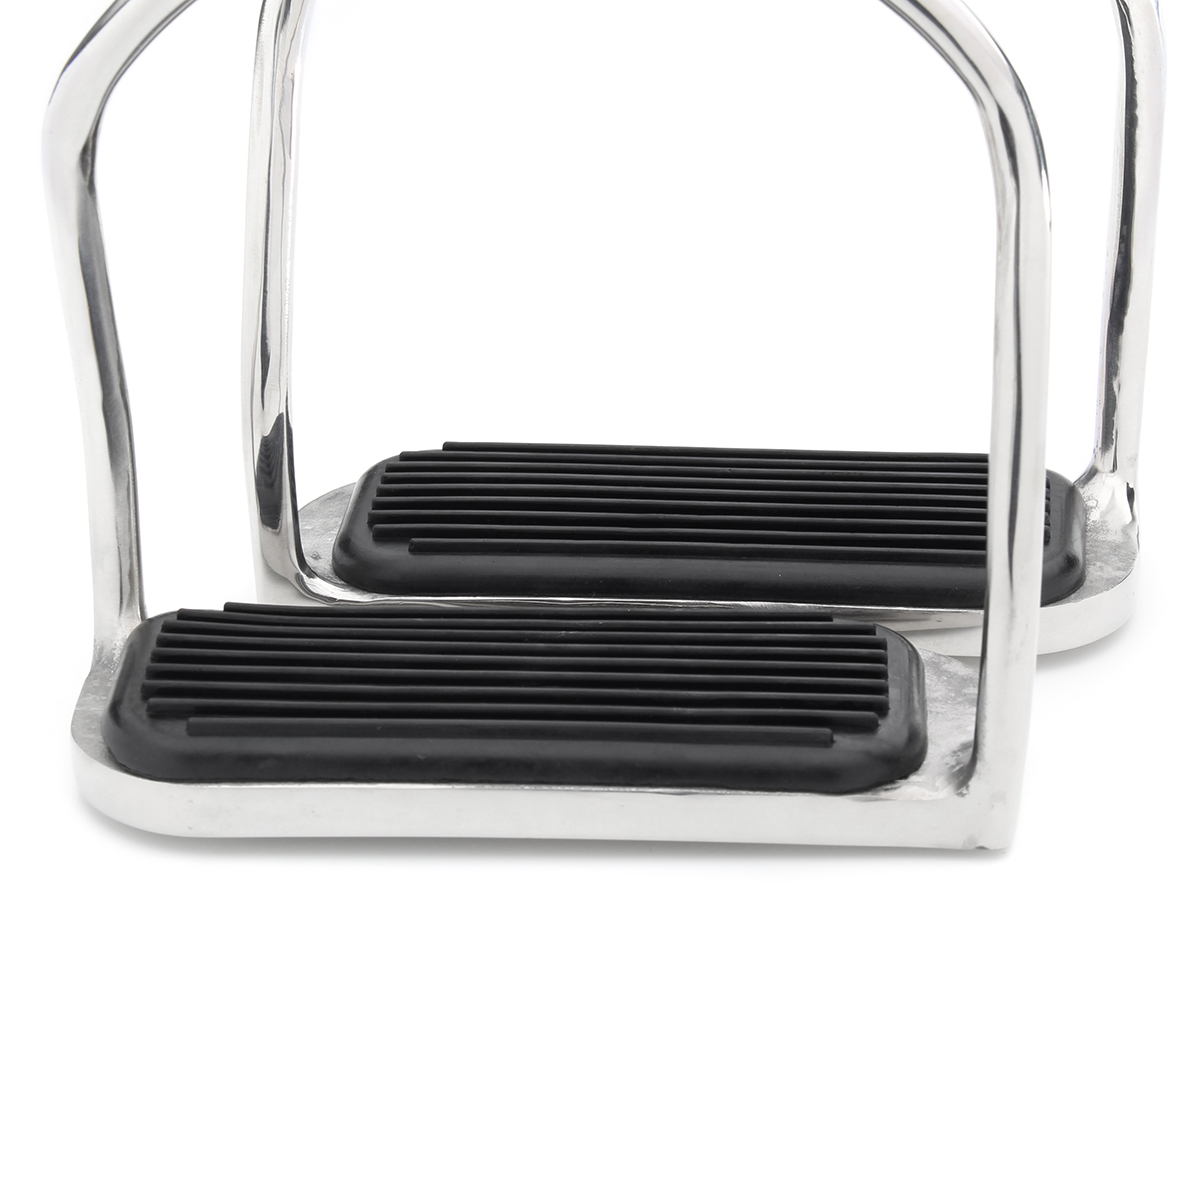 Horse-Riding-Stirrups-Stainless-Steel-Double-Bent-Safety-Stirrups-Irons-1241405